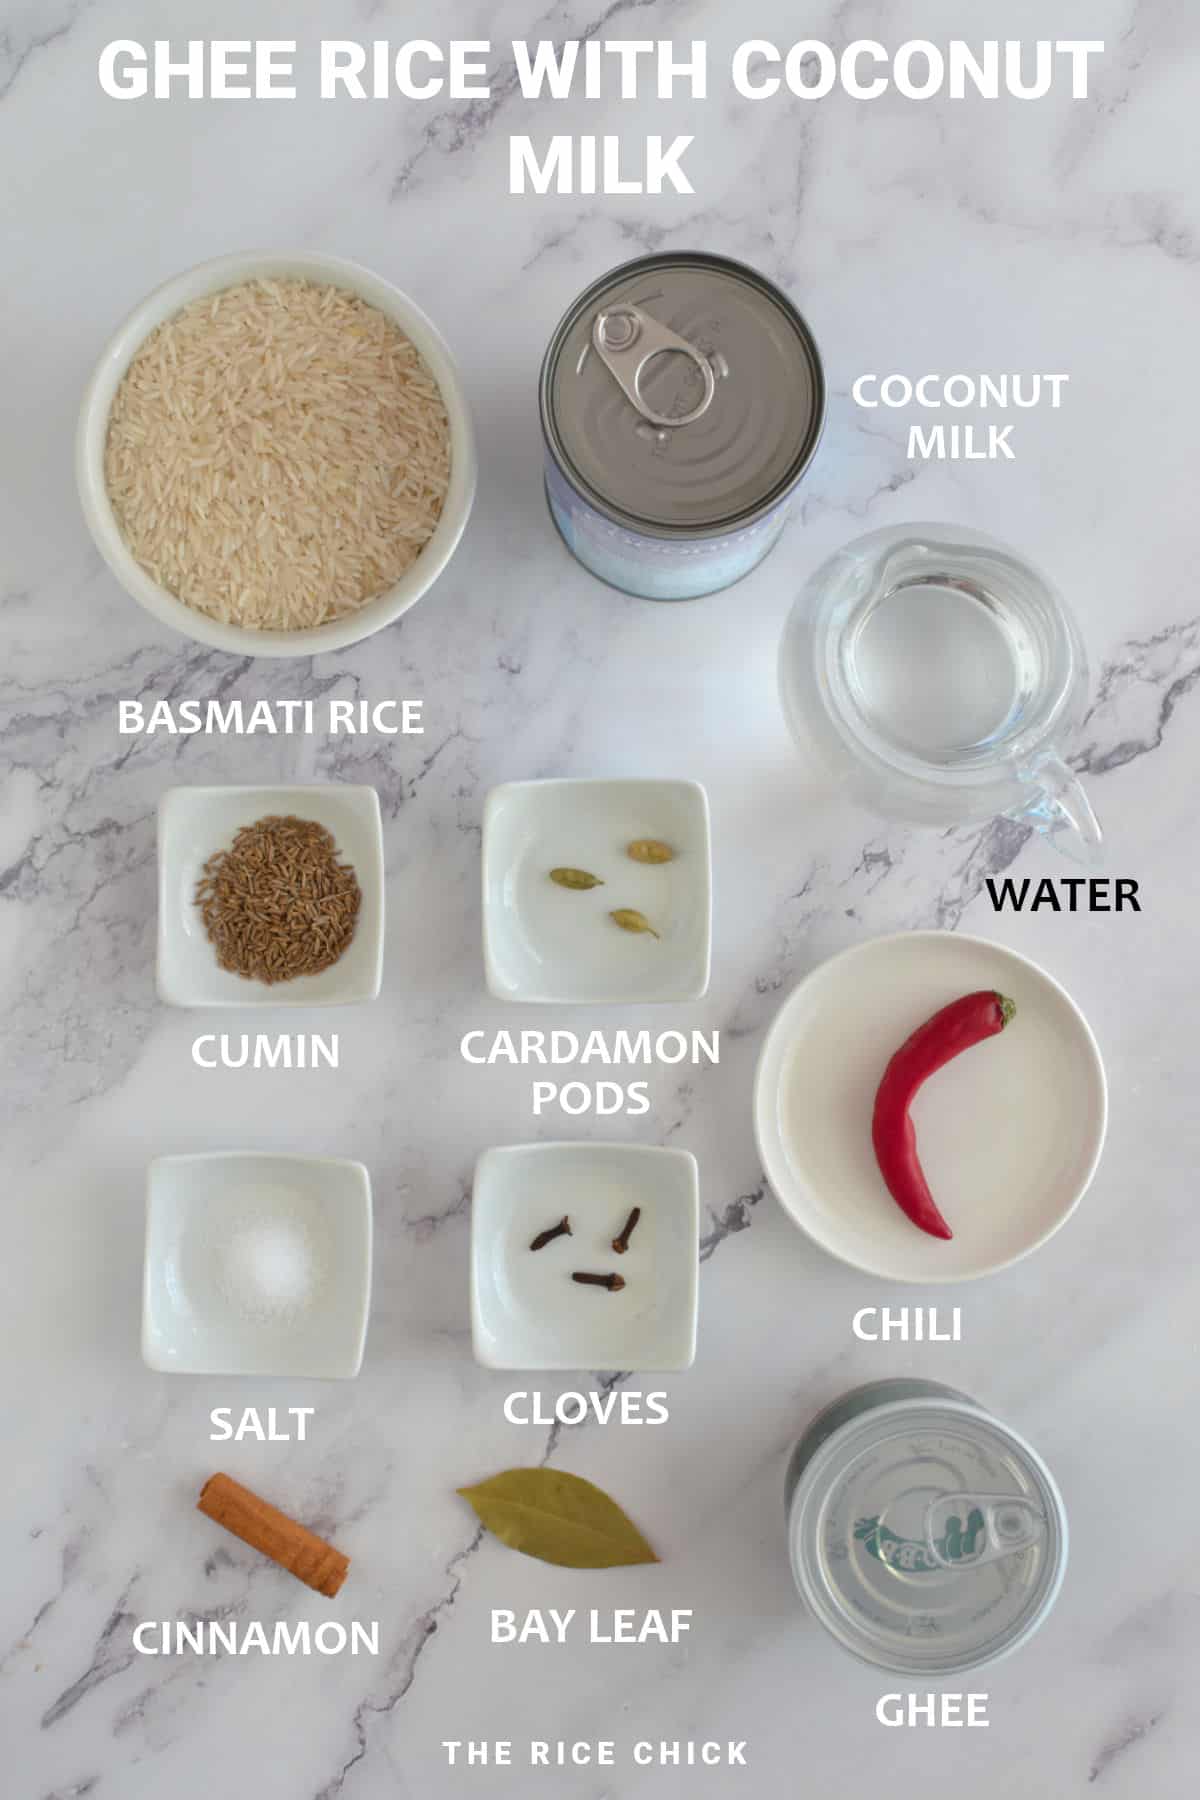 Ingredients for ghee rice with coconut milk.